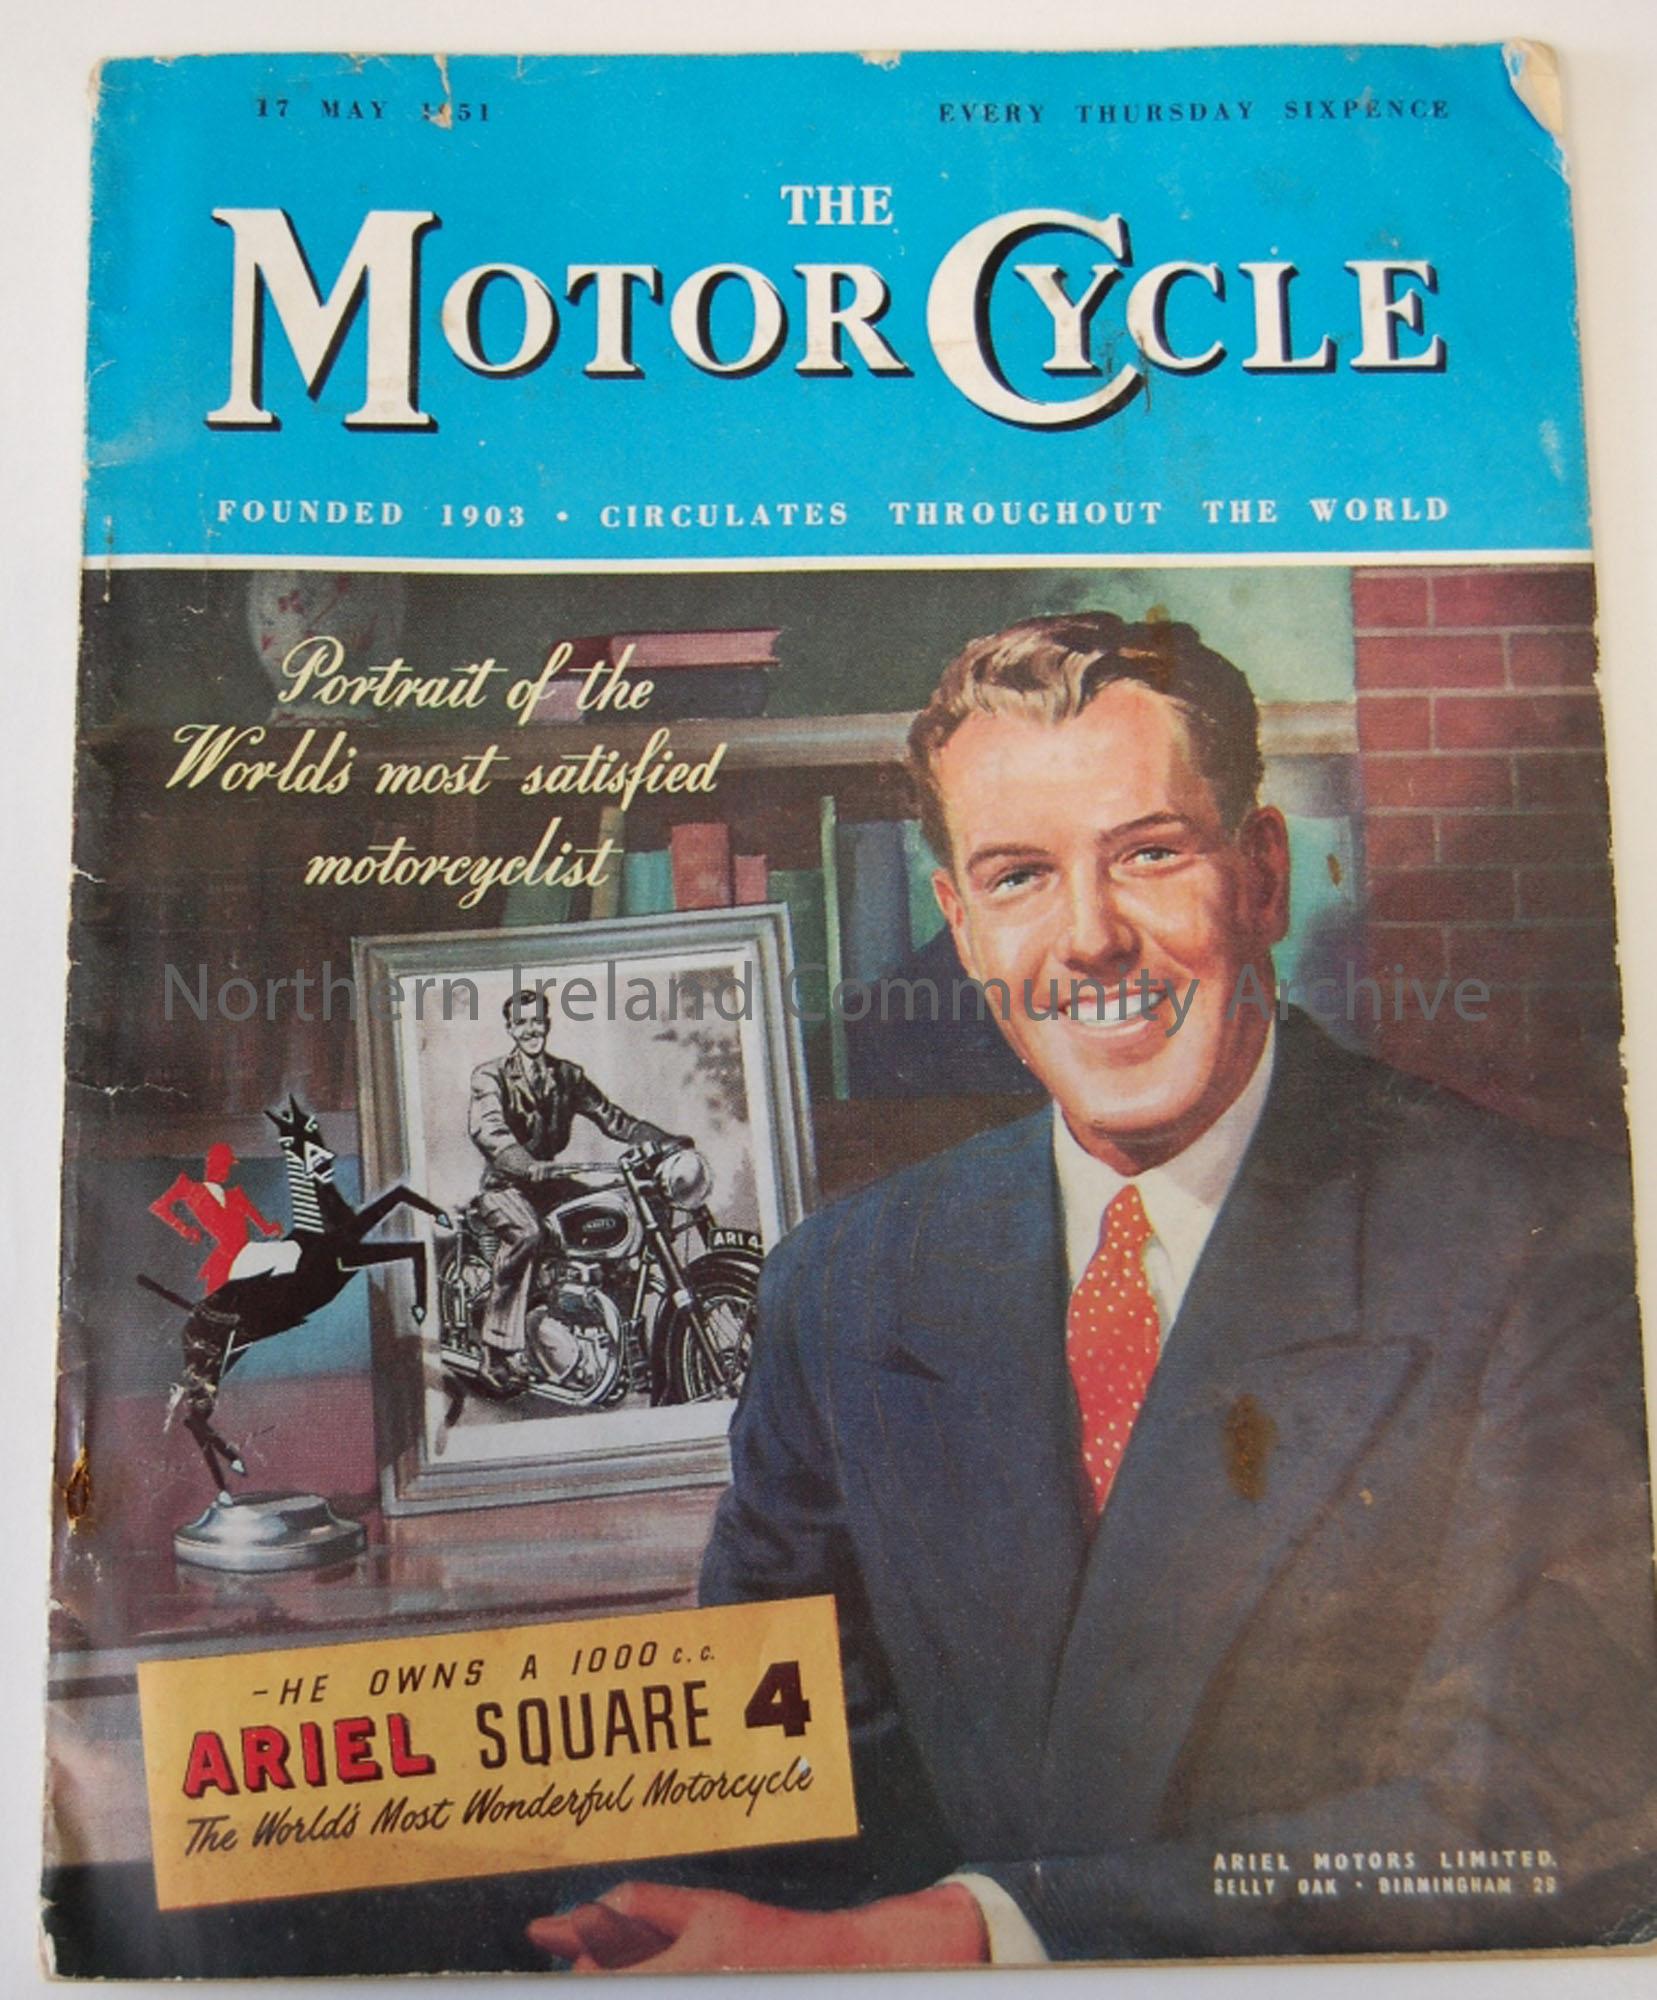 The Motor Cycle, 17th May 1951, Every Thursday sixpence. Blue / colour illustration of a man in suit on front cover.